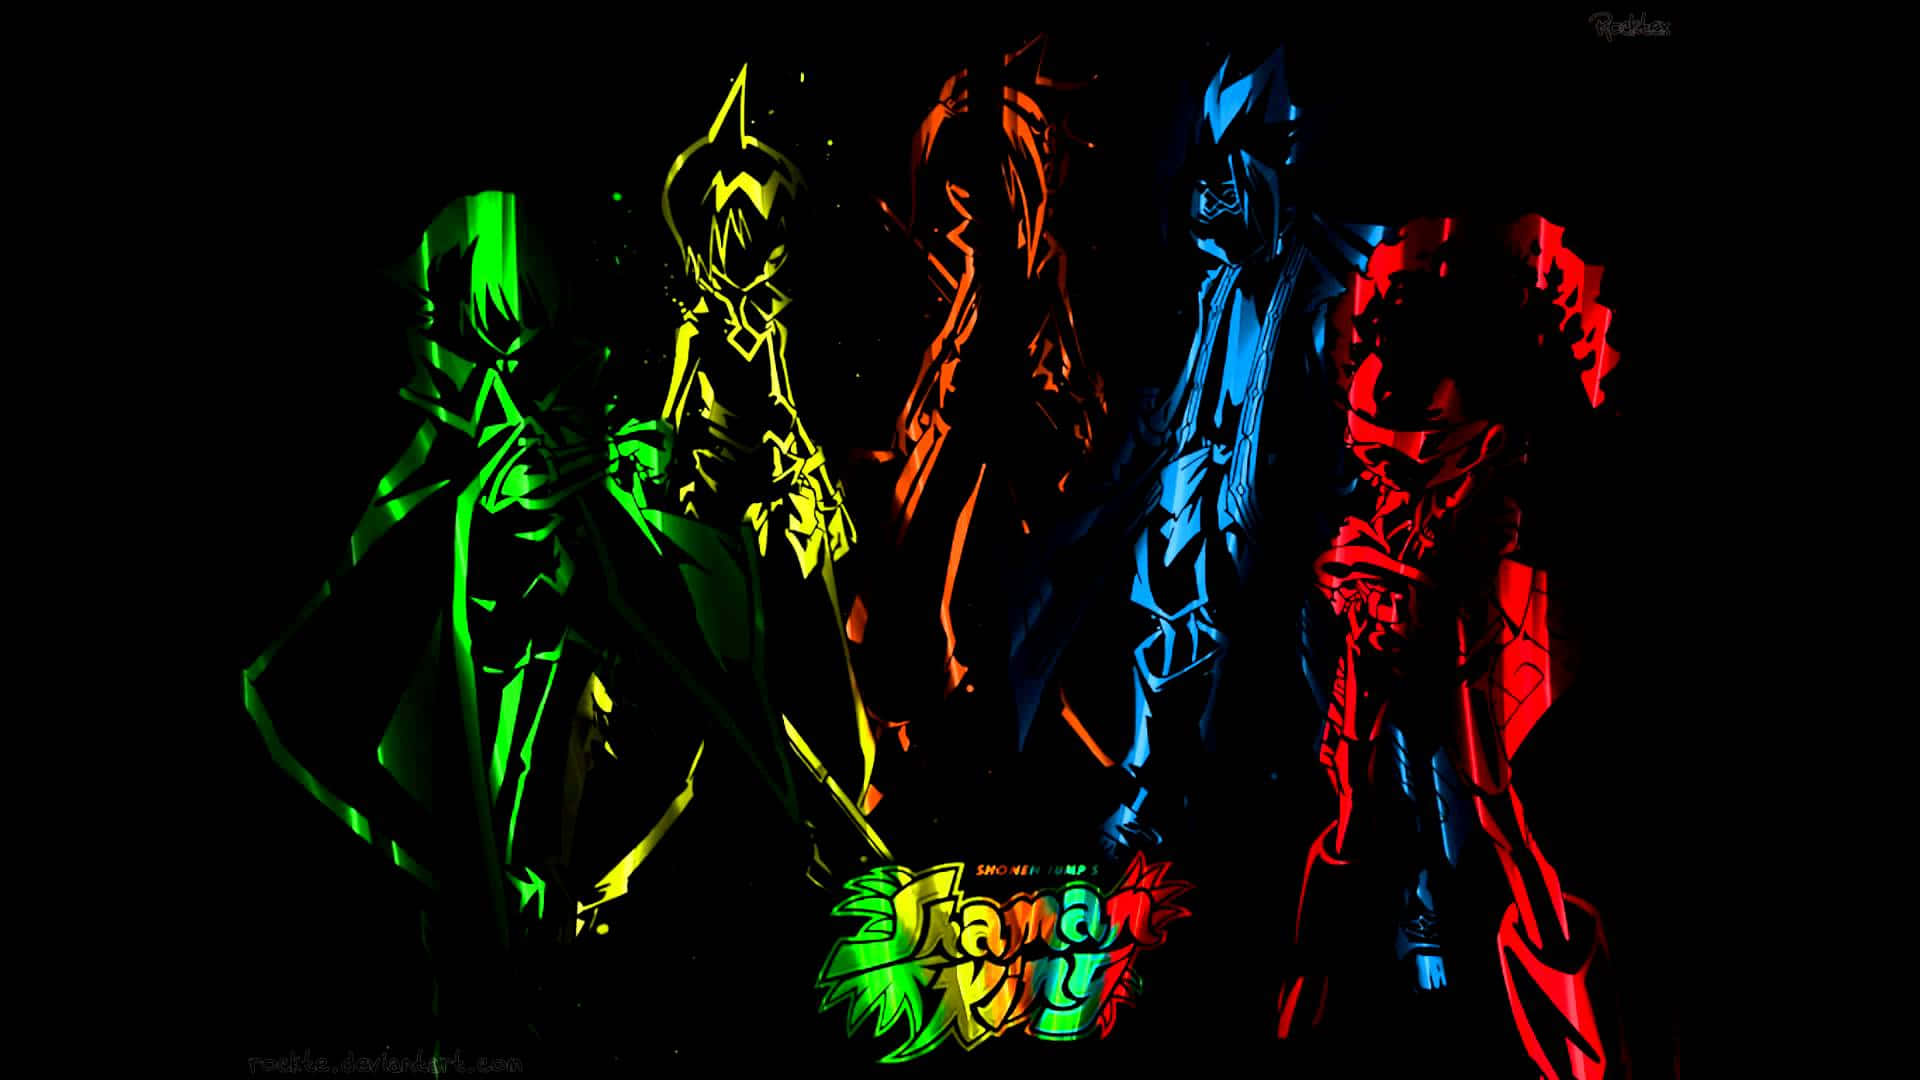 A Group Of People In Different Colors Standing In A Dark Room